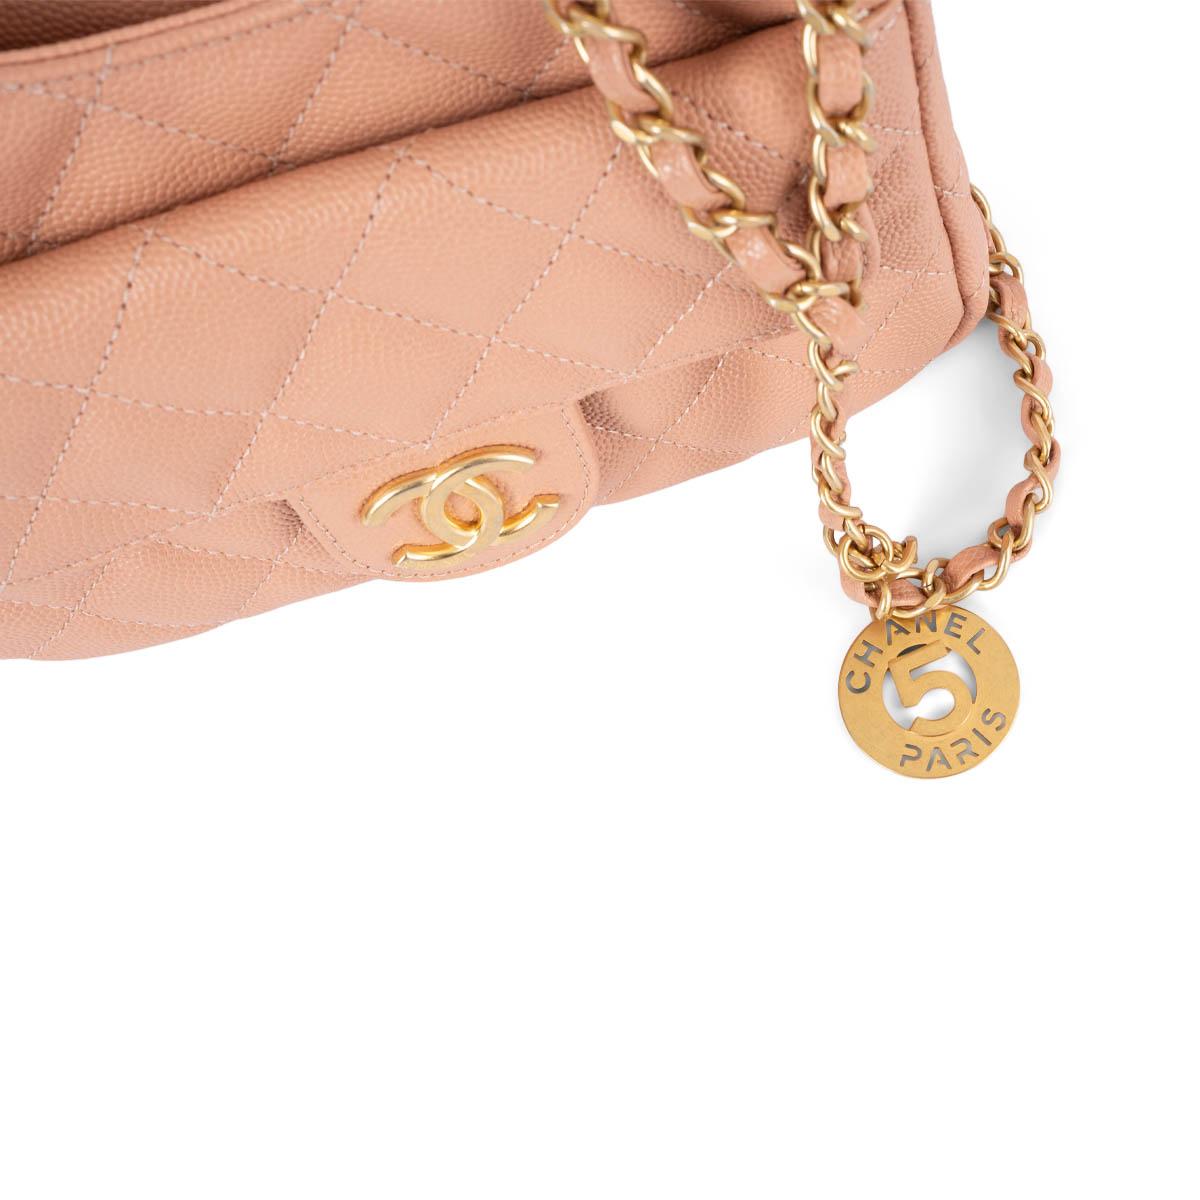 CHANEL beige peach Caviar leather SMALL WAVY HOBO Shoulder Bag NM375 For Sale 4